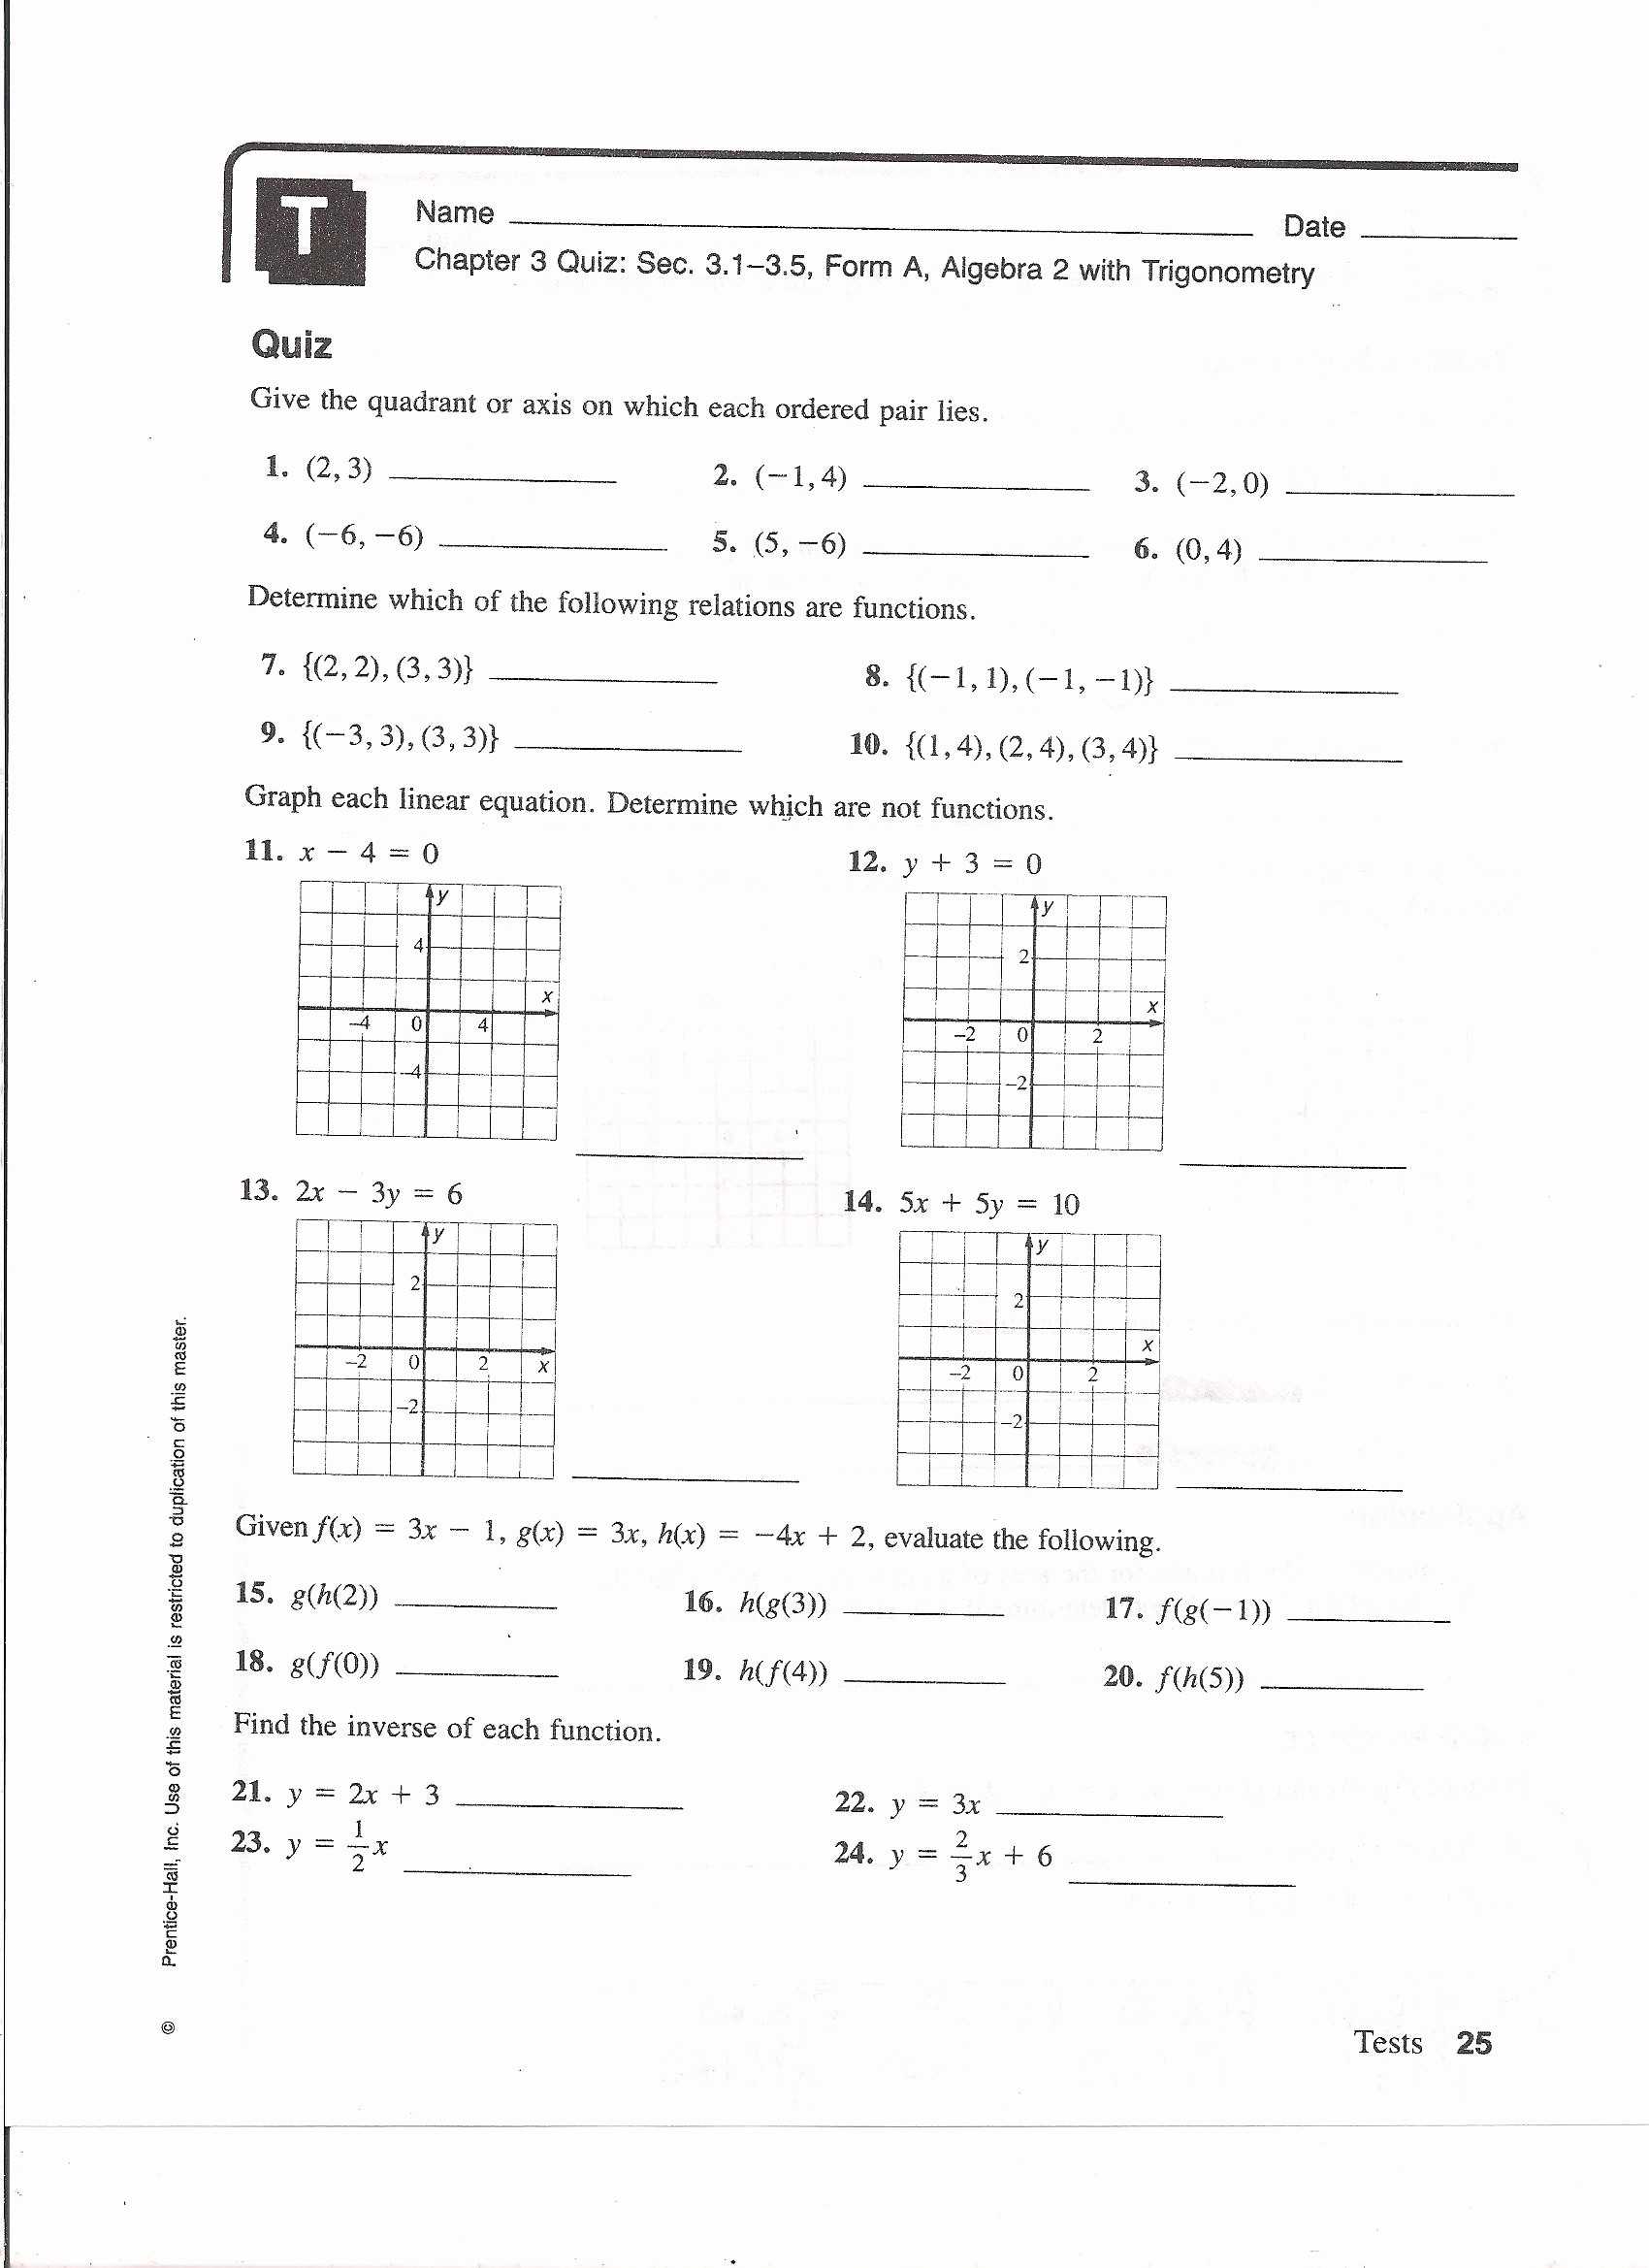 Trigonometry Practice Worksheets and Worksheet Algebra Functions Fresh Direct and Inverse Variation